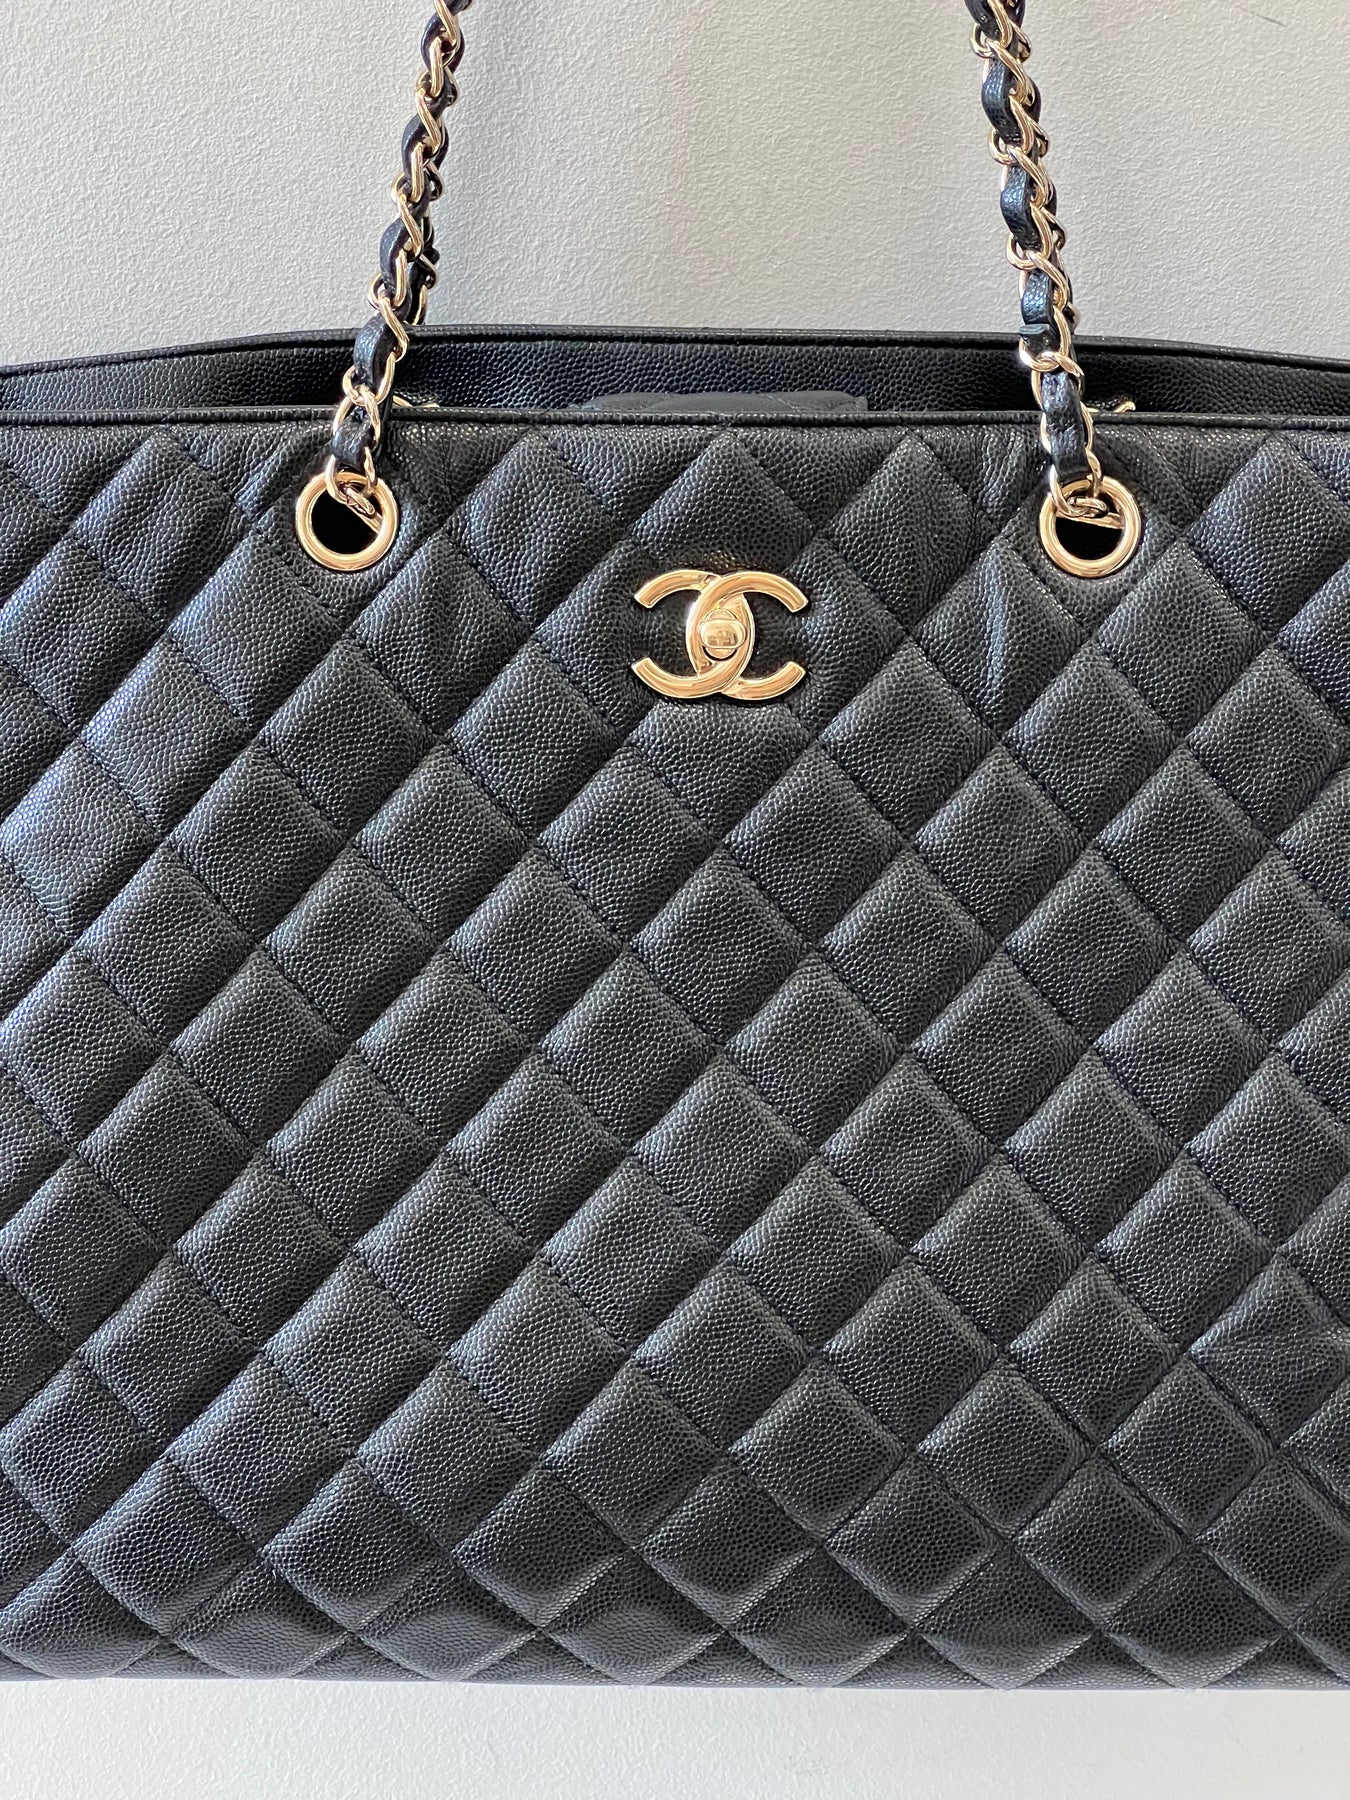 CHANEL HANDBAG GRAND CLASSIQUE TIMELESS QUILTED LEATHER CHAIN